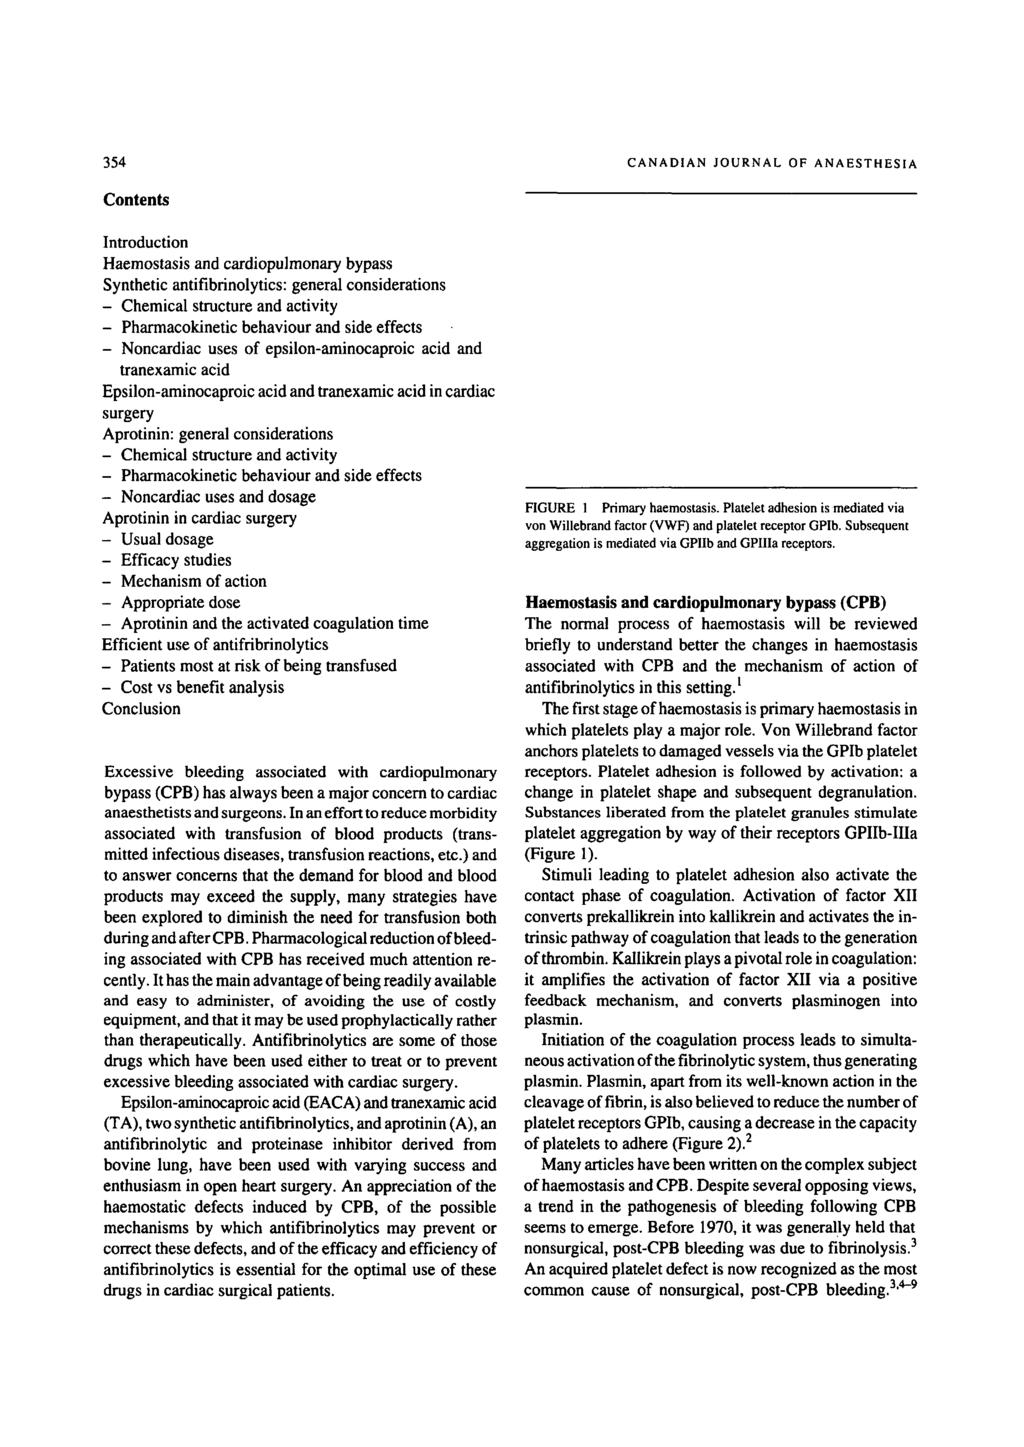 354 CANADIAN JOURNAL OF ANAESTHESIA Contents Introduction Haemostasis and cardiopulmonary bypass Synthetic antifibrinolytics: general considerations - Chemical structure and activity -